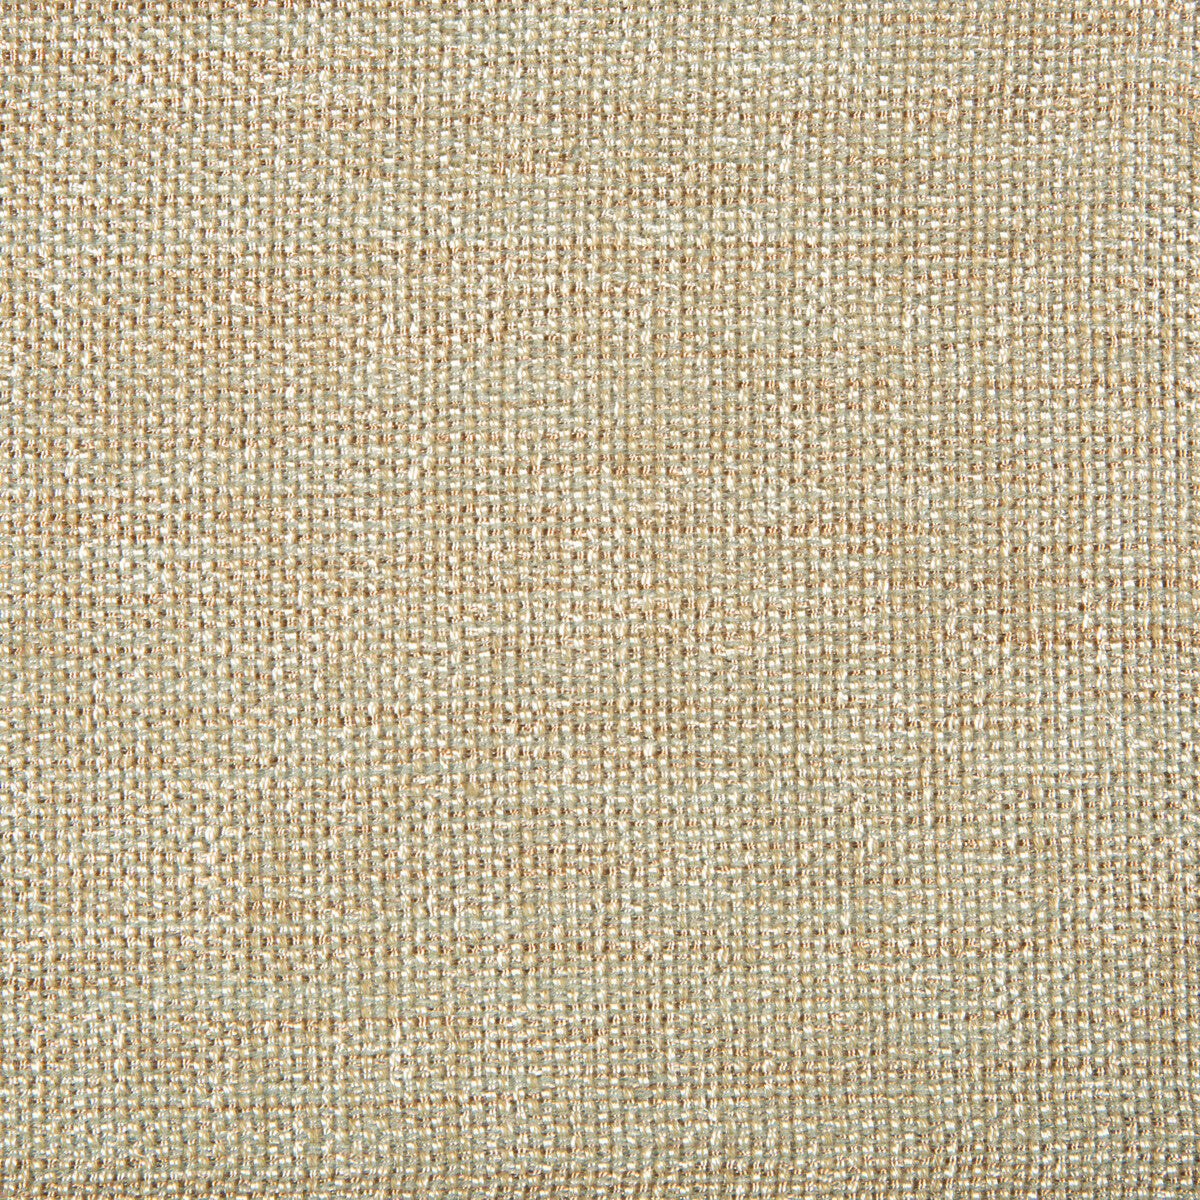 Kravet Contract fabric in 4458-415 color - pattern 4458.415.0 - by Kravet Contract